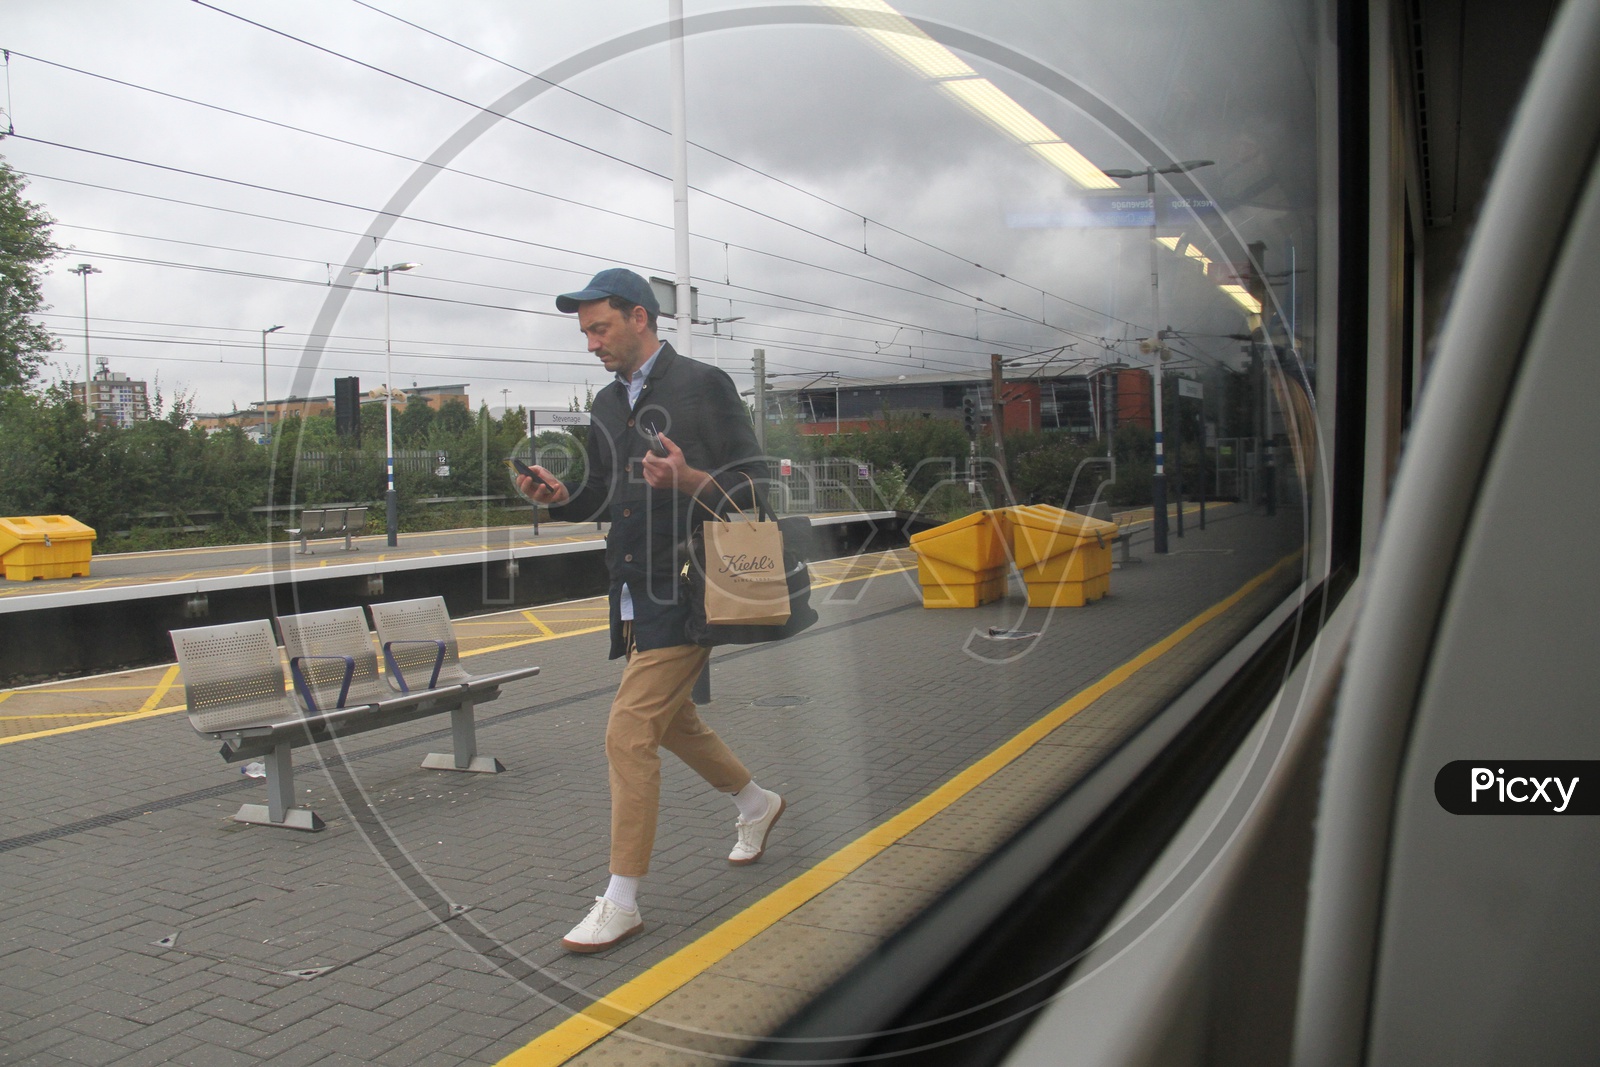 A man walking on Platform with using Mobile or Smartphone